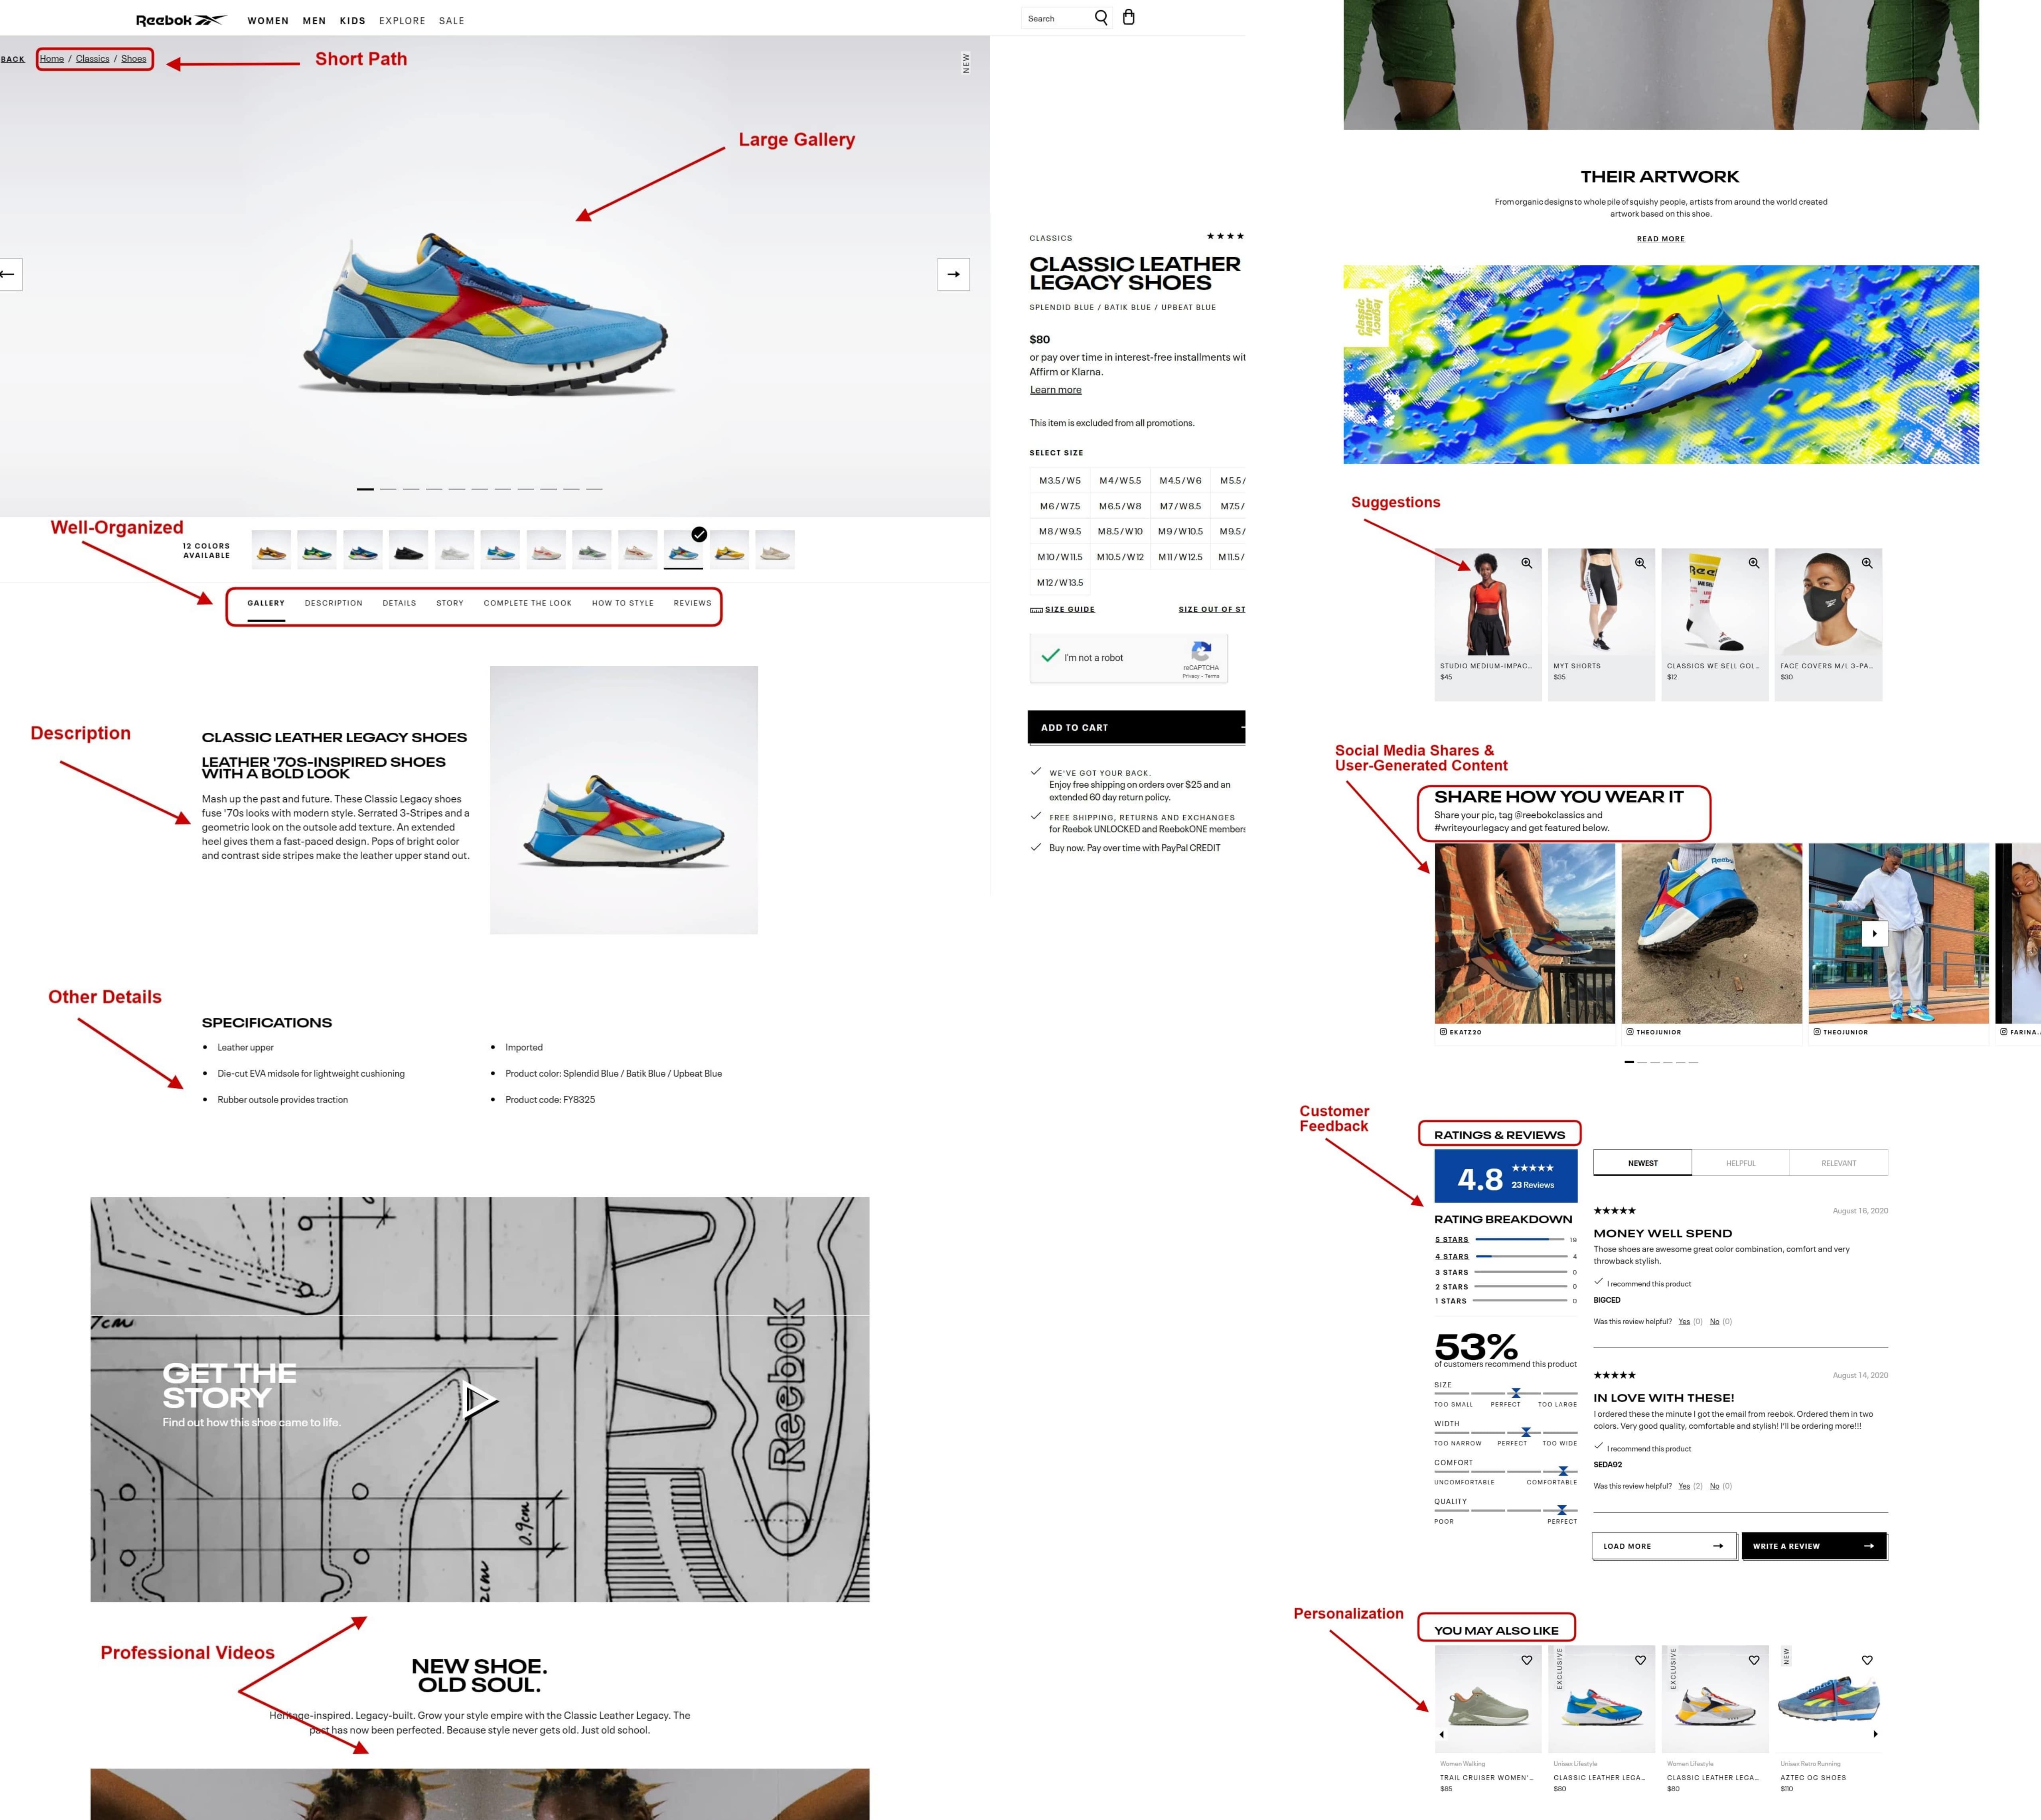 Avoid eCommerce mistakes Screenshot from the official Reebok website